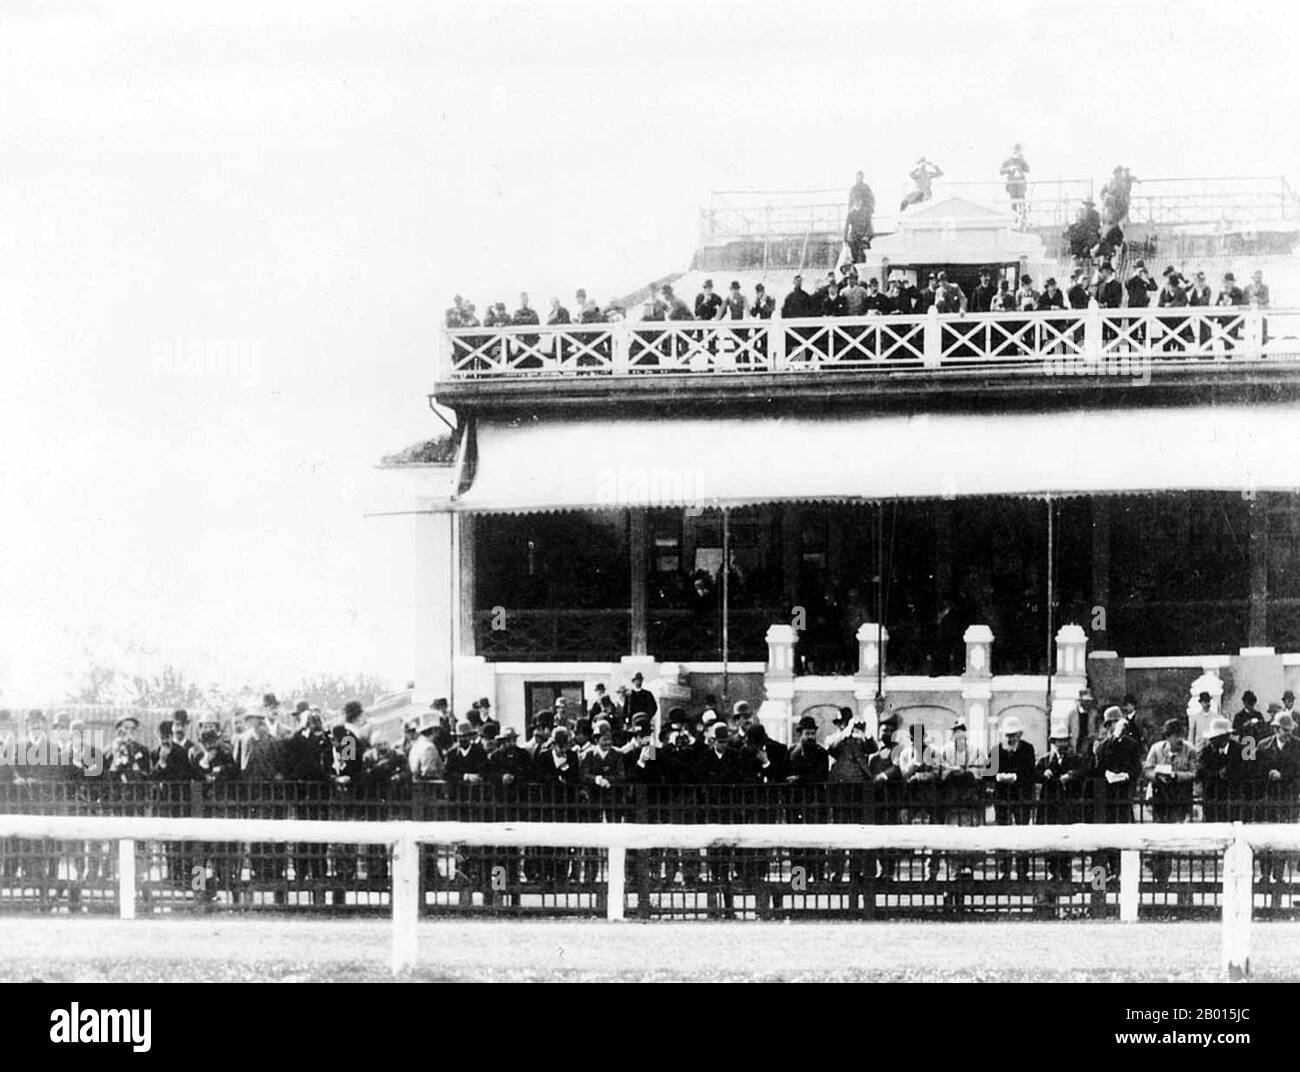 China: Shanghai races, SRC spring meeting 1881.  The Shanghai Race Club was the original horse racing organization for Shanghai, China. When the first horse race meeting in Shanghai took place during 1848 the Shanghai Race Club was known as the Race Committee of the Shanghai Recreation Club. In 1855 it became a Club. In 1862 it detached itself from the Shanghai Recreation Club to become an independent body. The Shanghai Race Club closed down in 1941 and reformed in 2006. Stock Photo